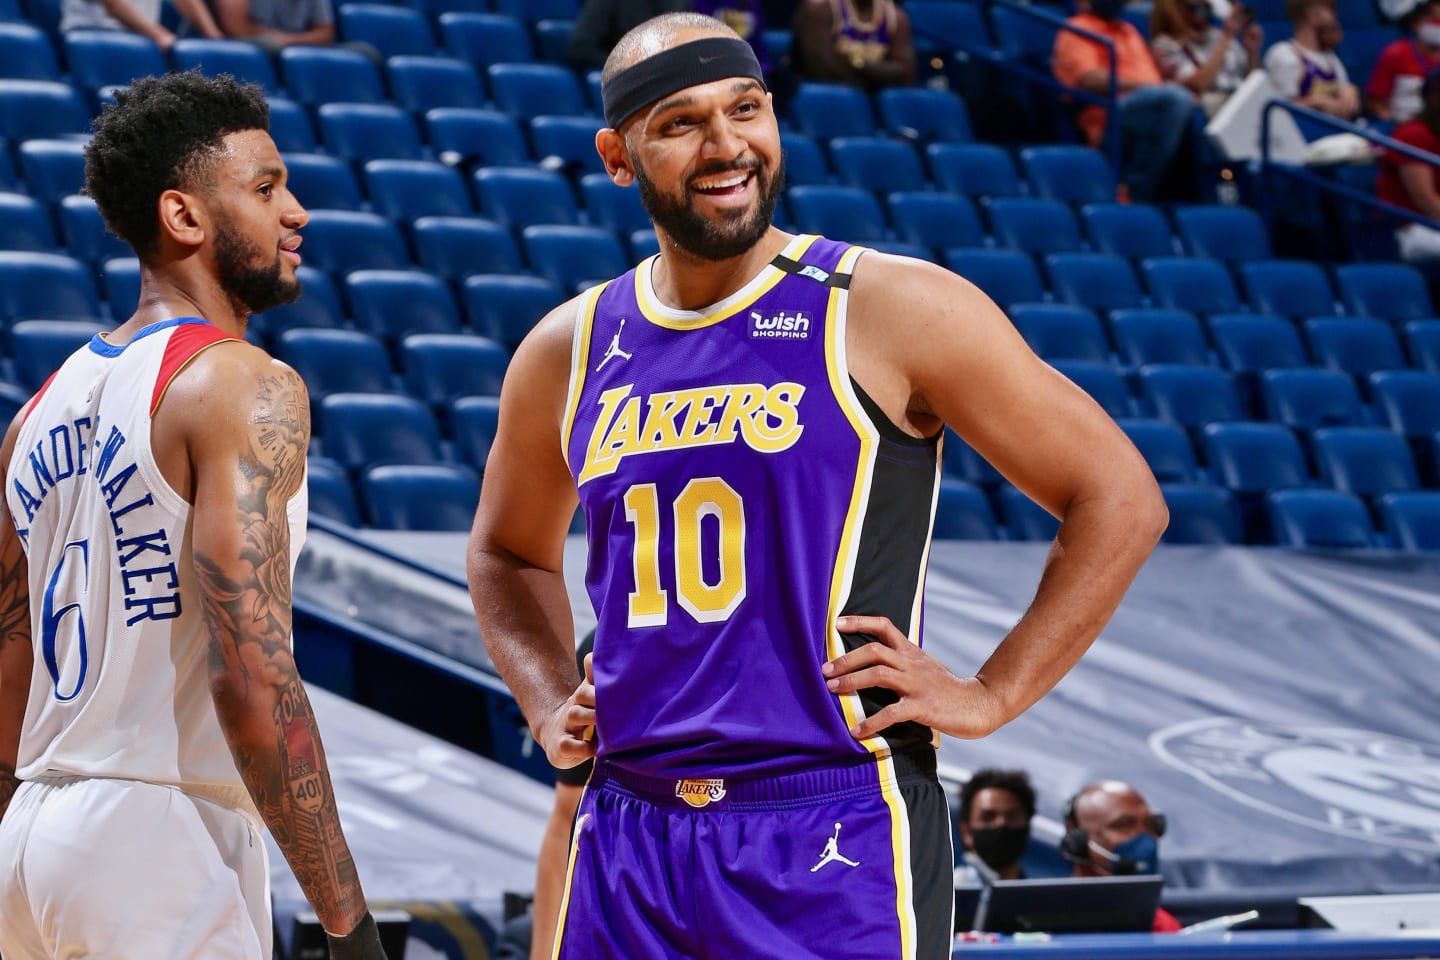 NBA A to Z: Jared Dudley on free agency, criticism of today's game